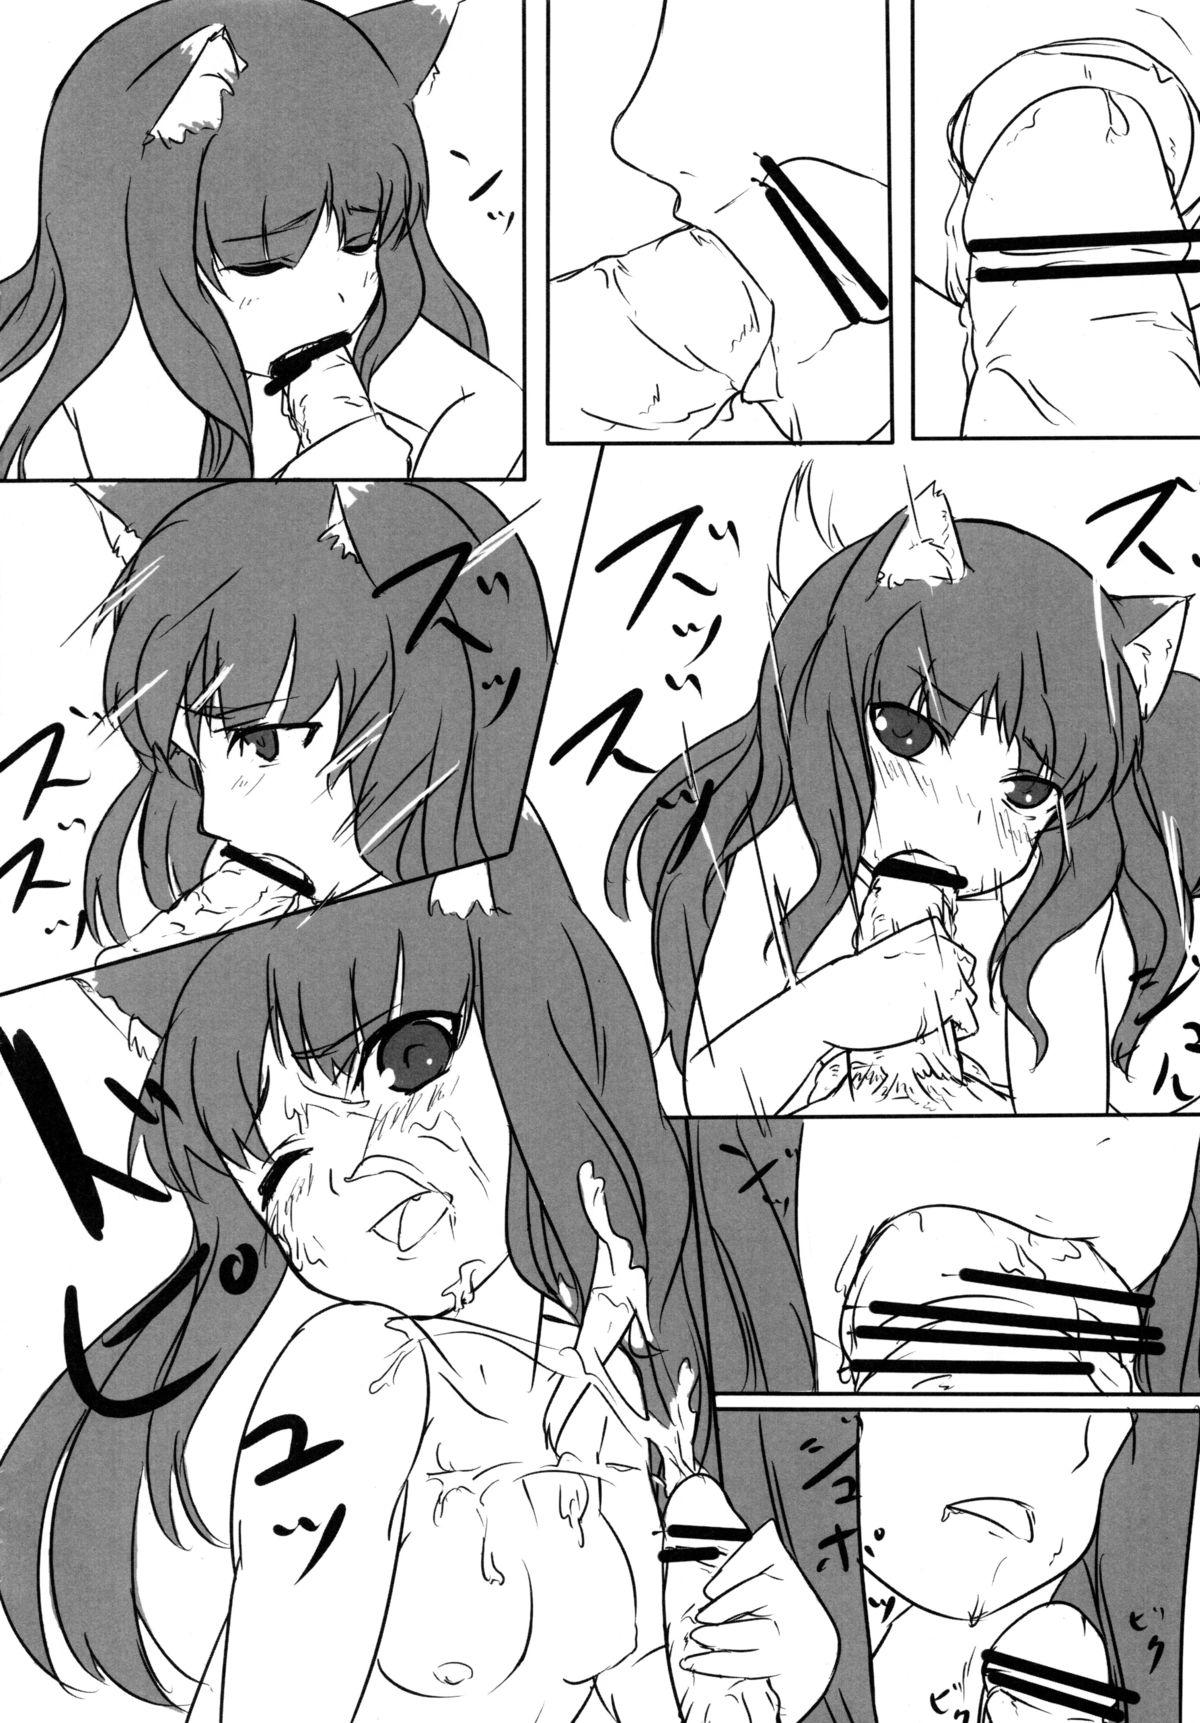 Stroking Ookamito Koushinryou IIKB - Spice and wolf Grandmother - Page 10